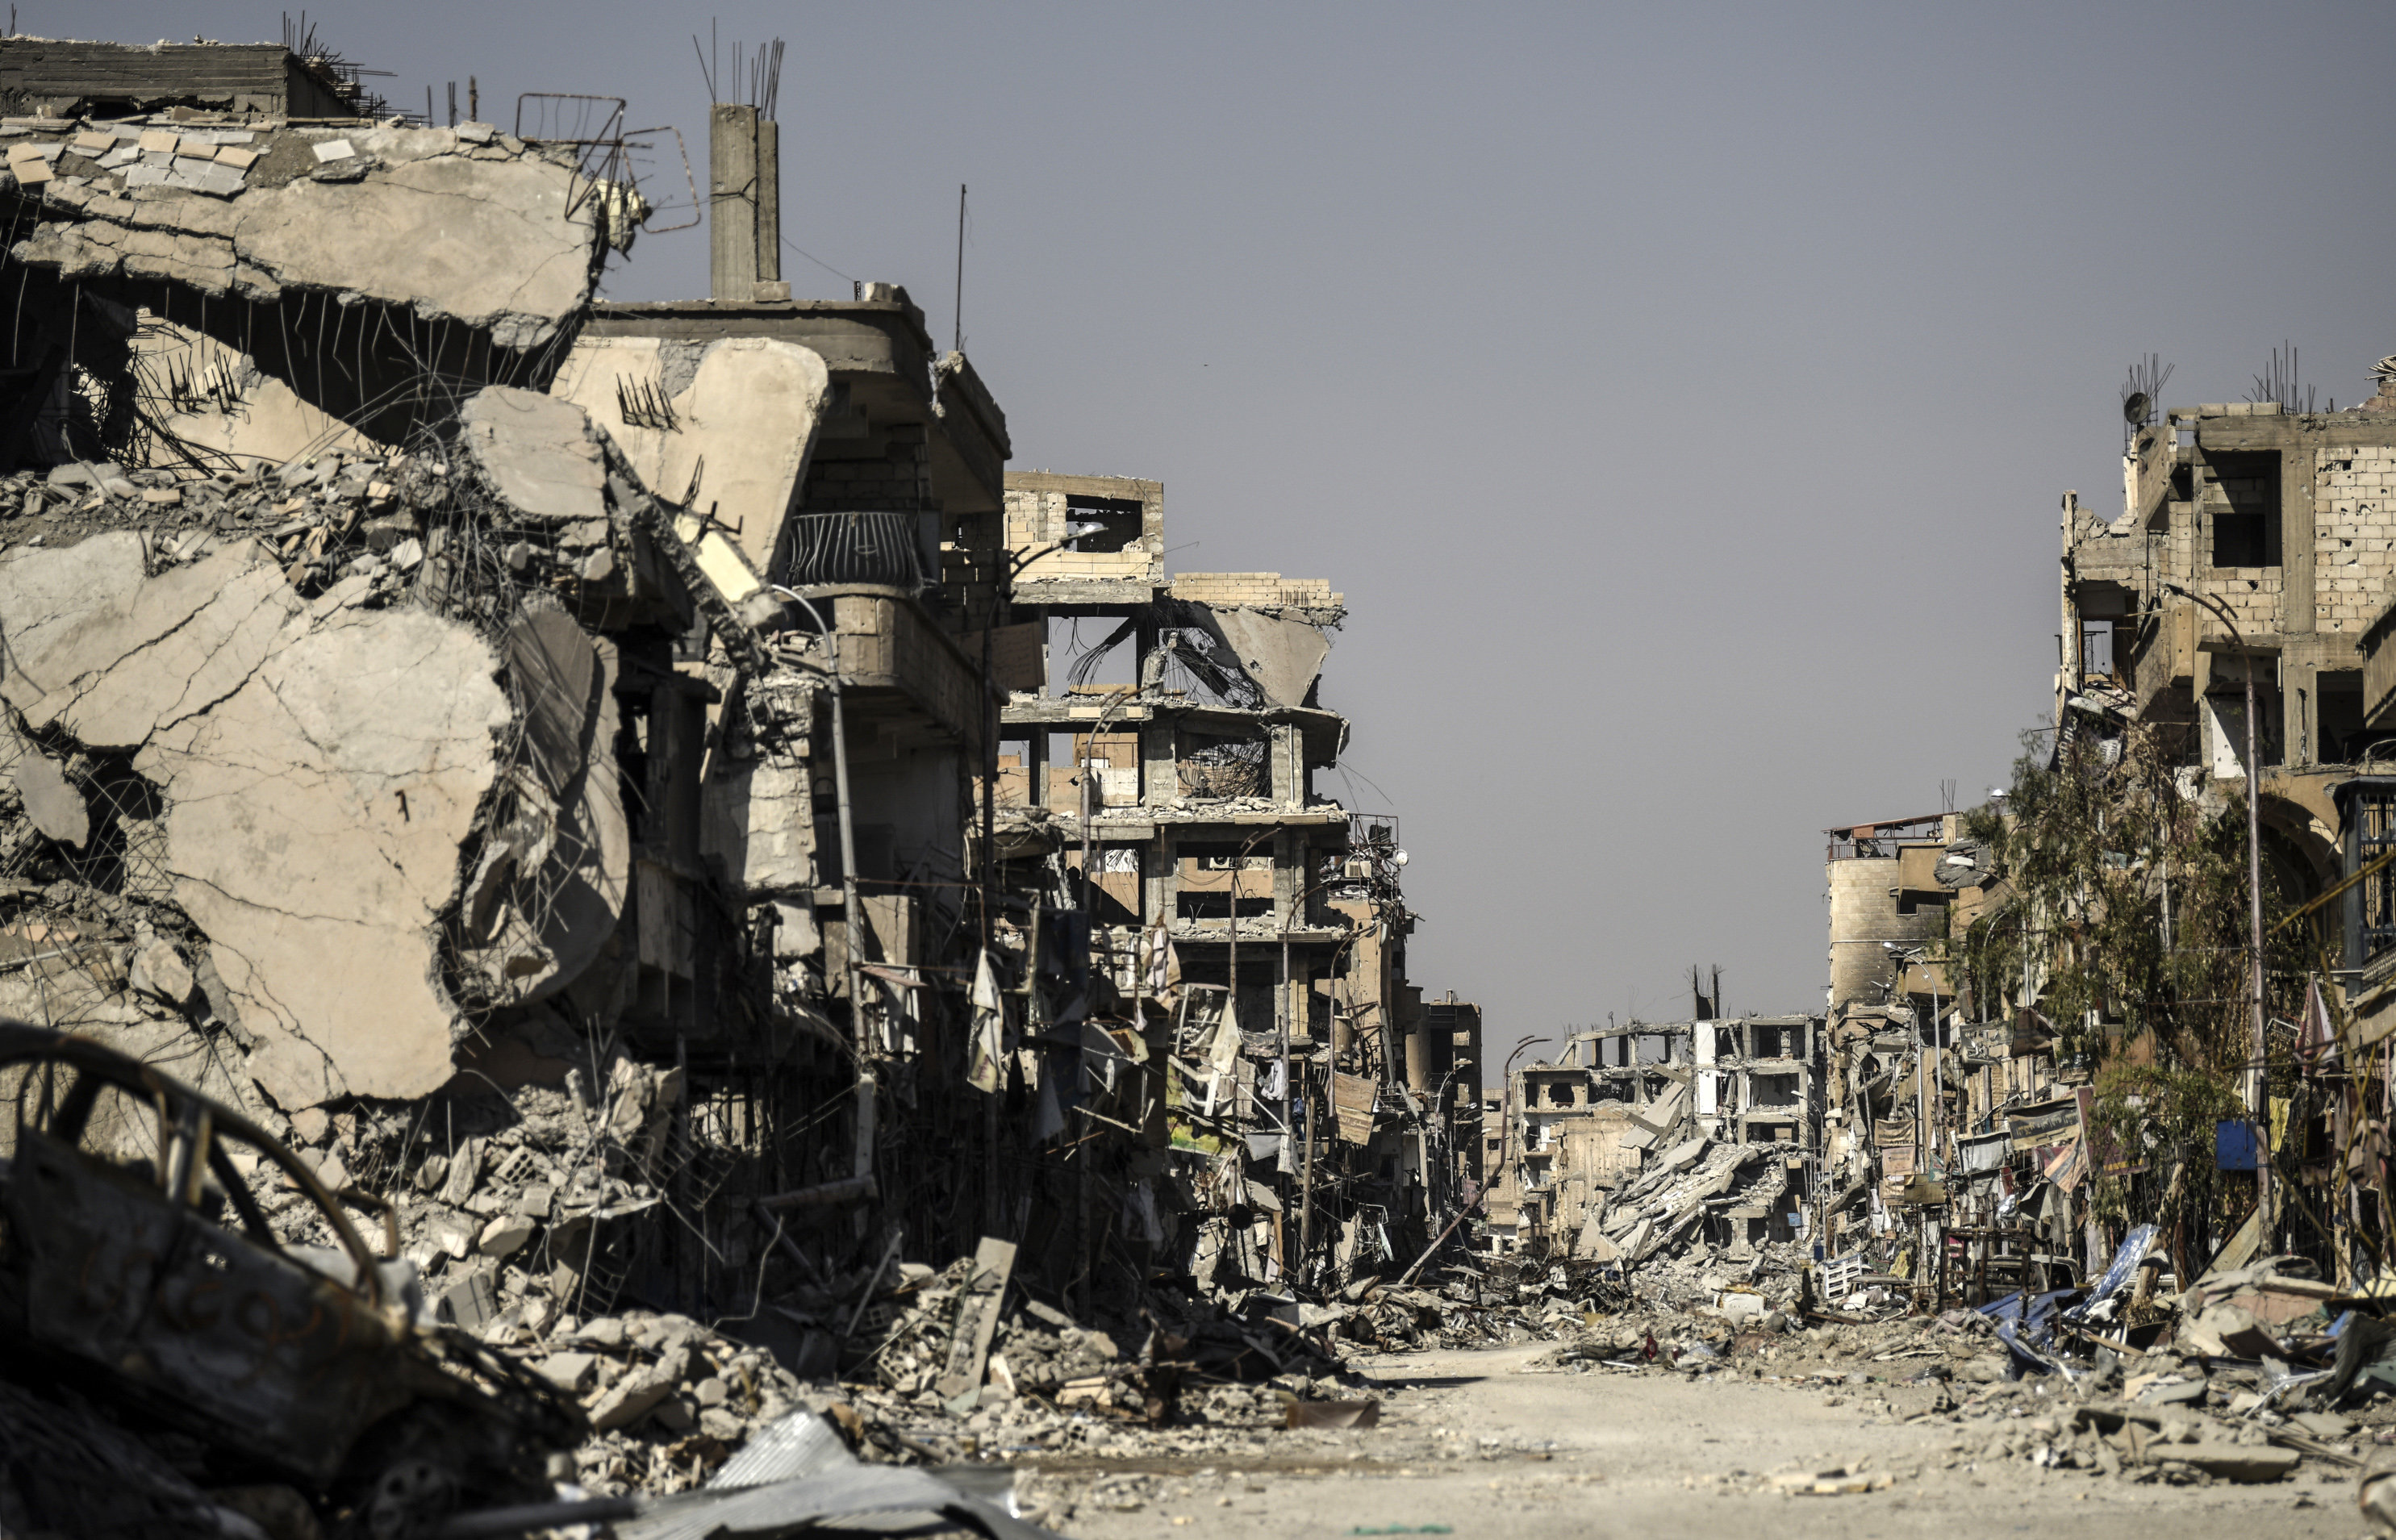 <strong>A photo of heavily damaged buildings in Raqqa, which has been the scene of intense fighting for months&nbsp;</strong>